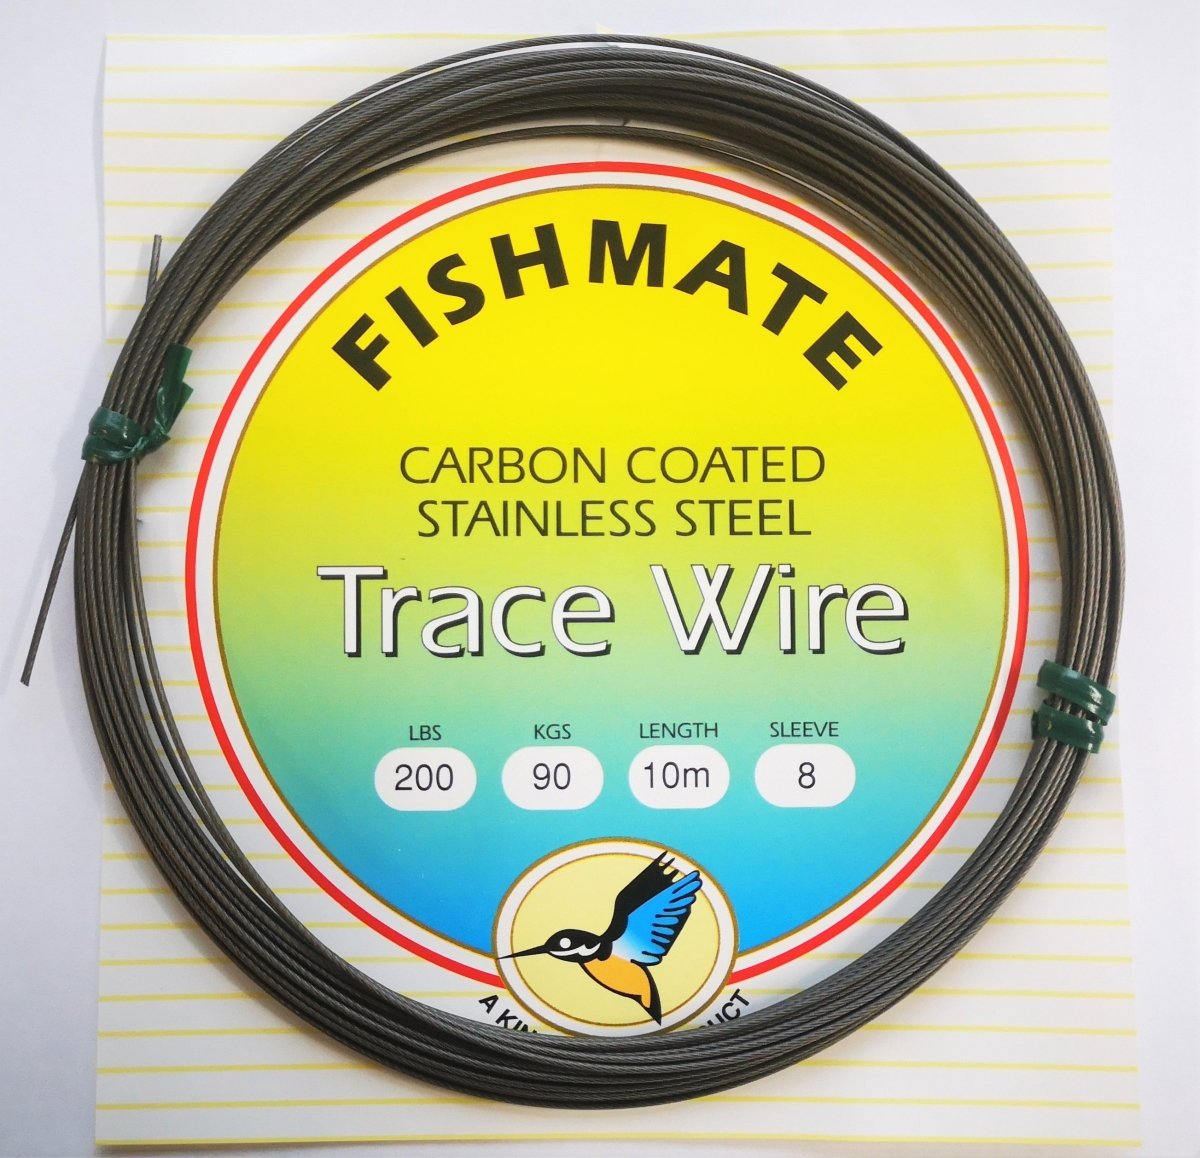 Fishmate Carbon Coated Trace Wire – Stil Fishing